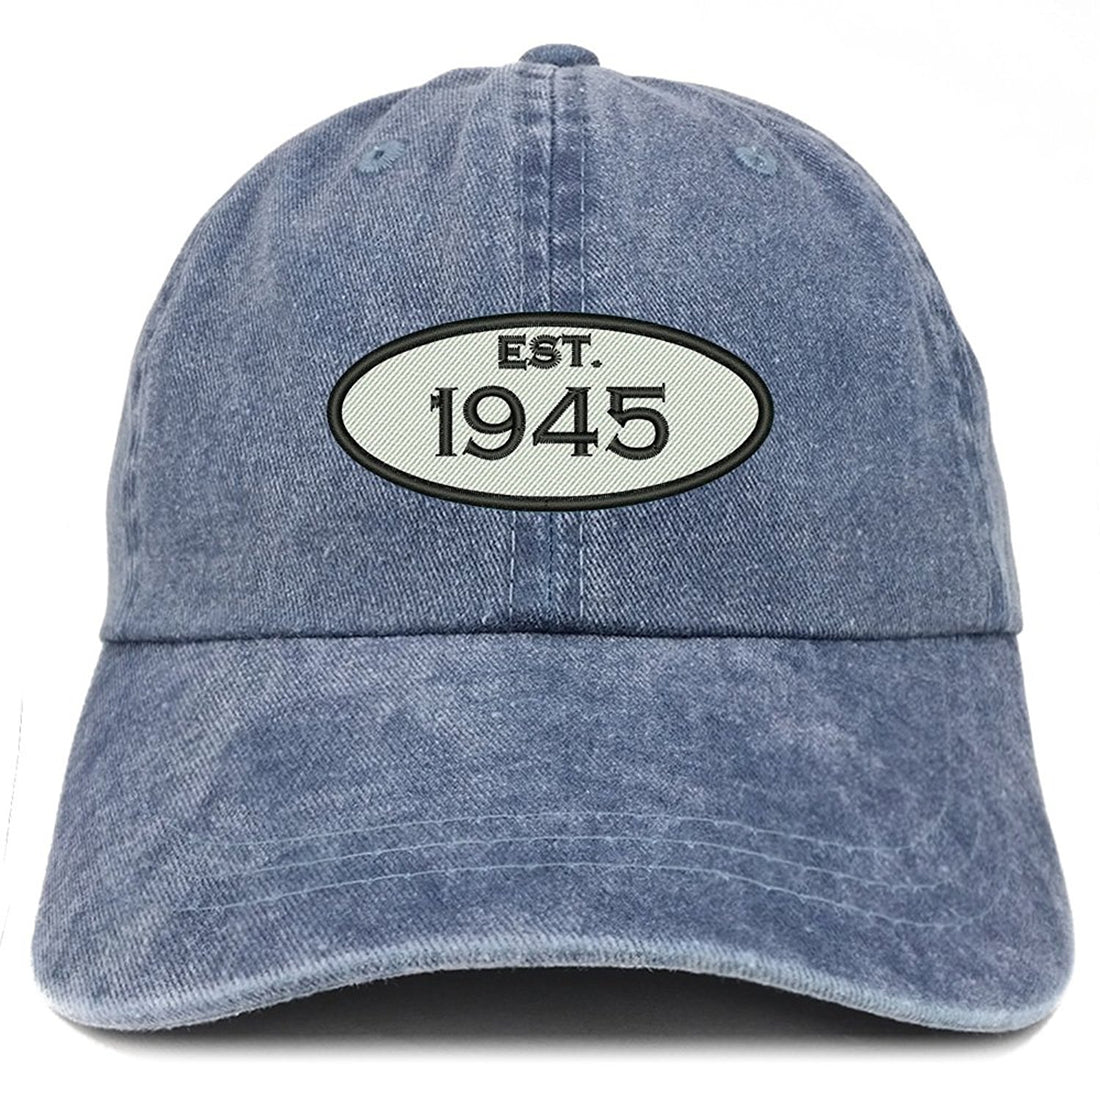 Trendy Apparel Shop Established 1945 Embroidered 74th Birthday Gift Pigment Dyed Washed Cotton Cap